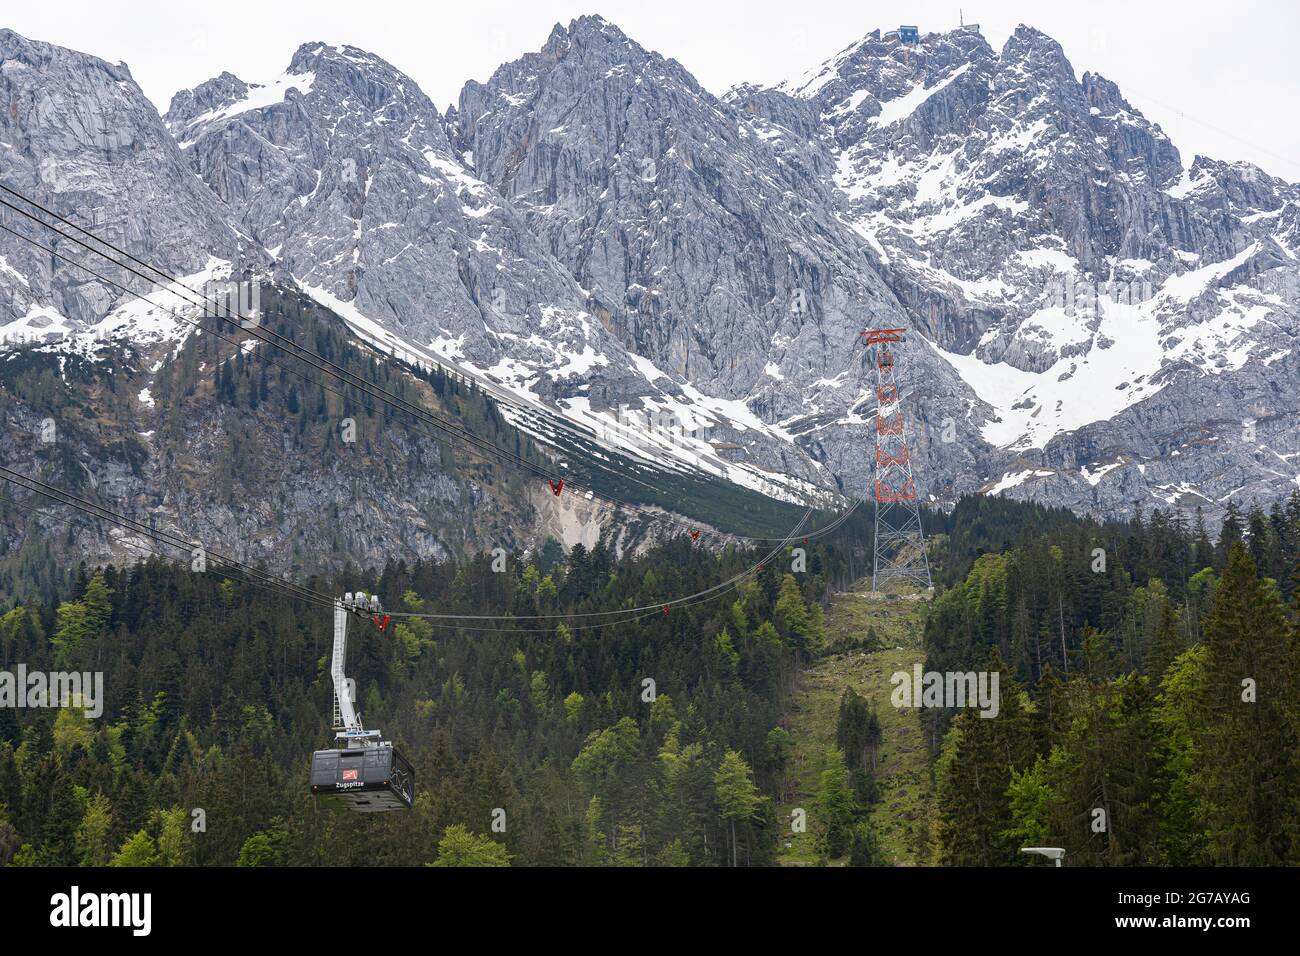 View from the Zugspitz valley station to the cable car and the summit, Grainau, Upper Bavaria, Germany Stock Photo